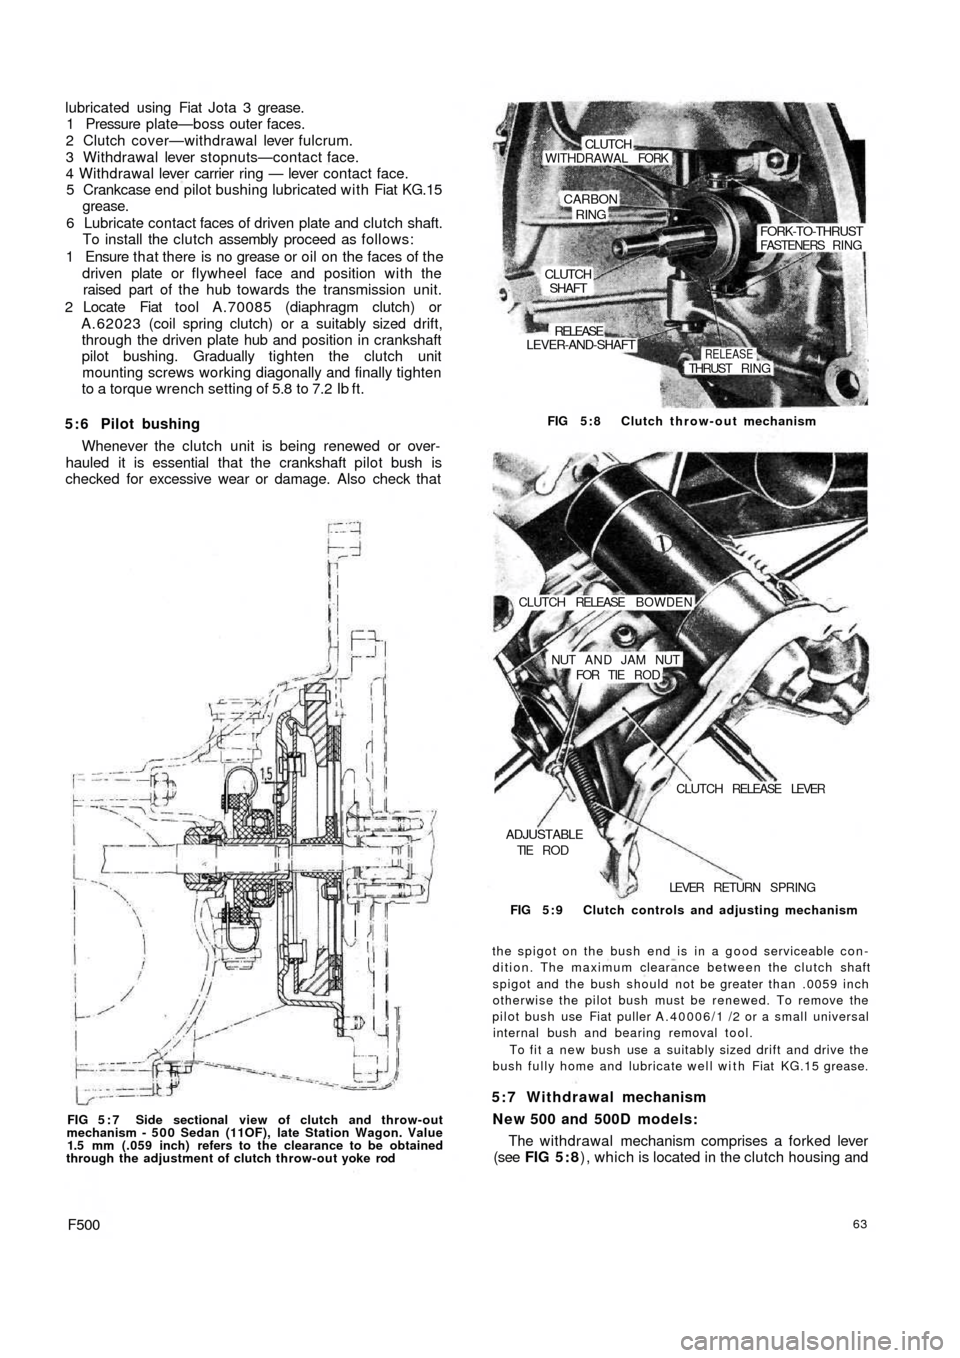 FIAT 500 1964 1.G Workshop Manual lubricated using Fiat Jota 3 grease.
1 Pressure plate—boss outer faces.
2 Clutch cover—withdrawal lever fulcrum.
3 Withdrawal lever stopnuts—contact face.
4 Withdrawal lever carrier ring — lev